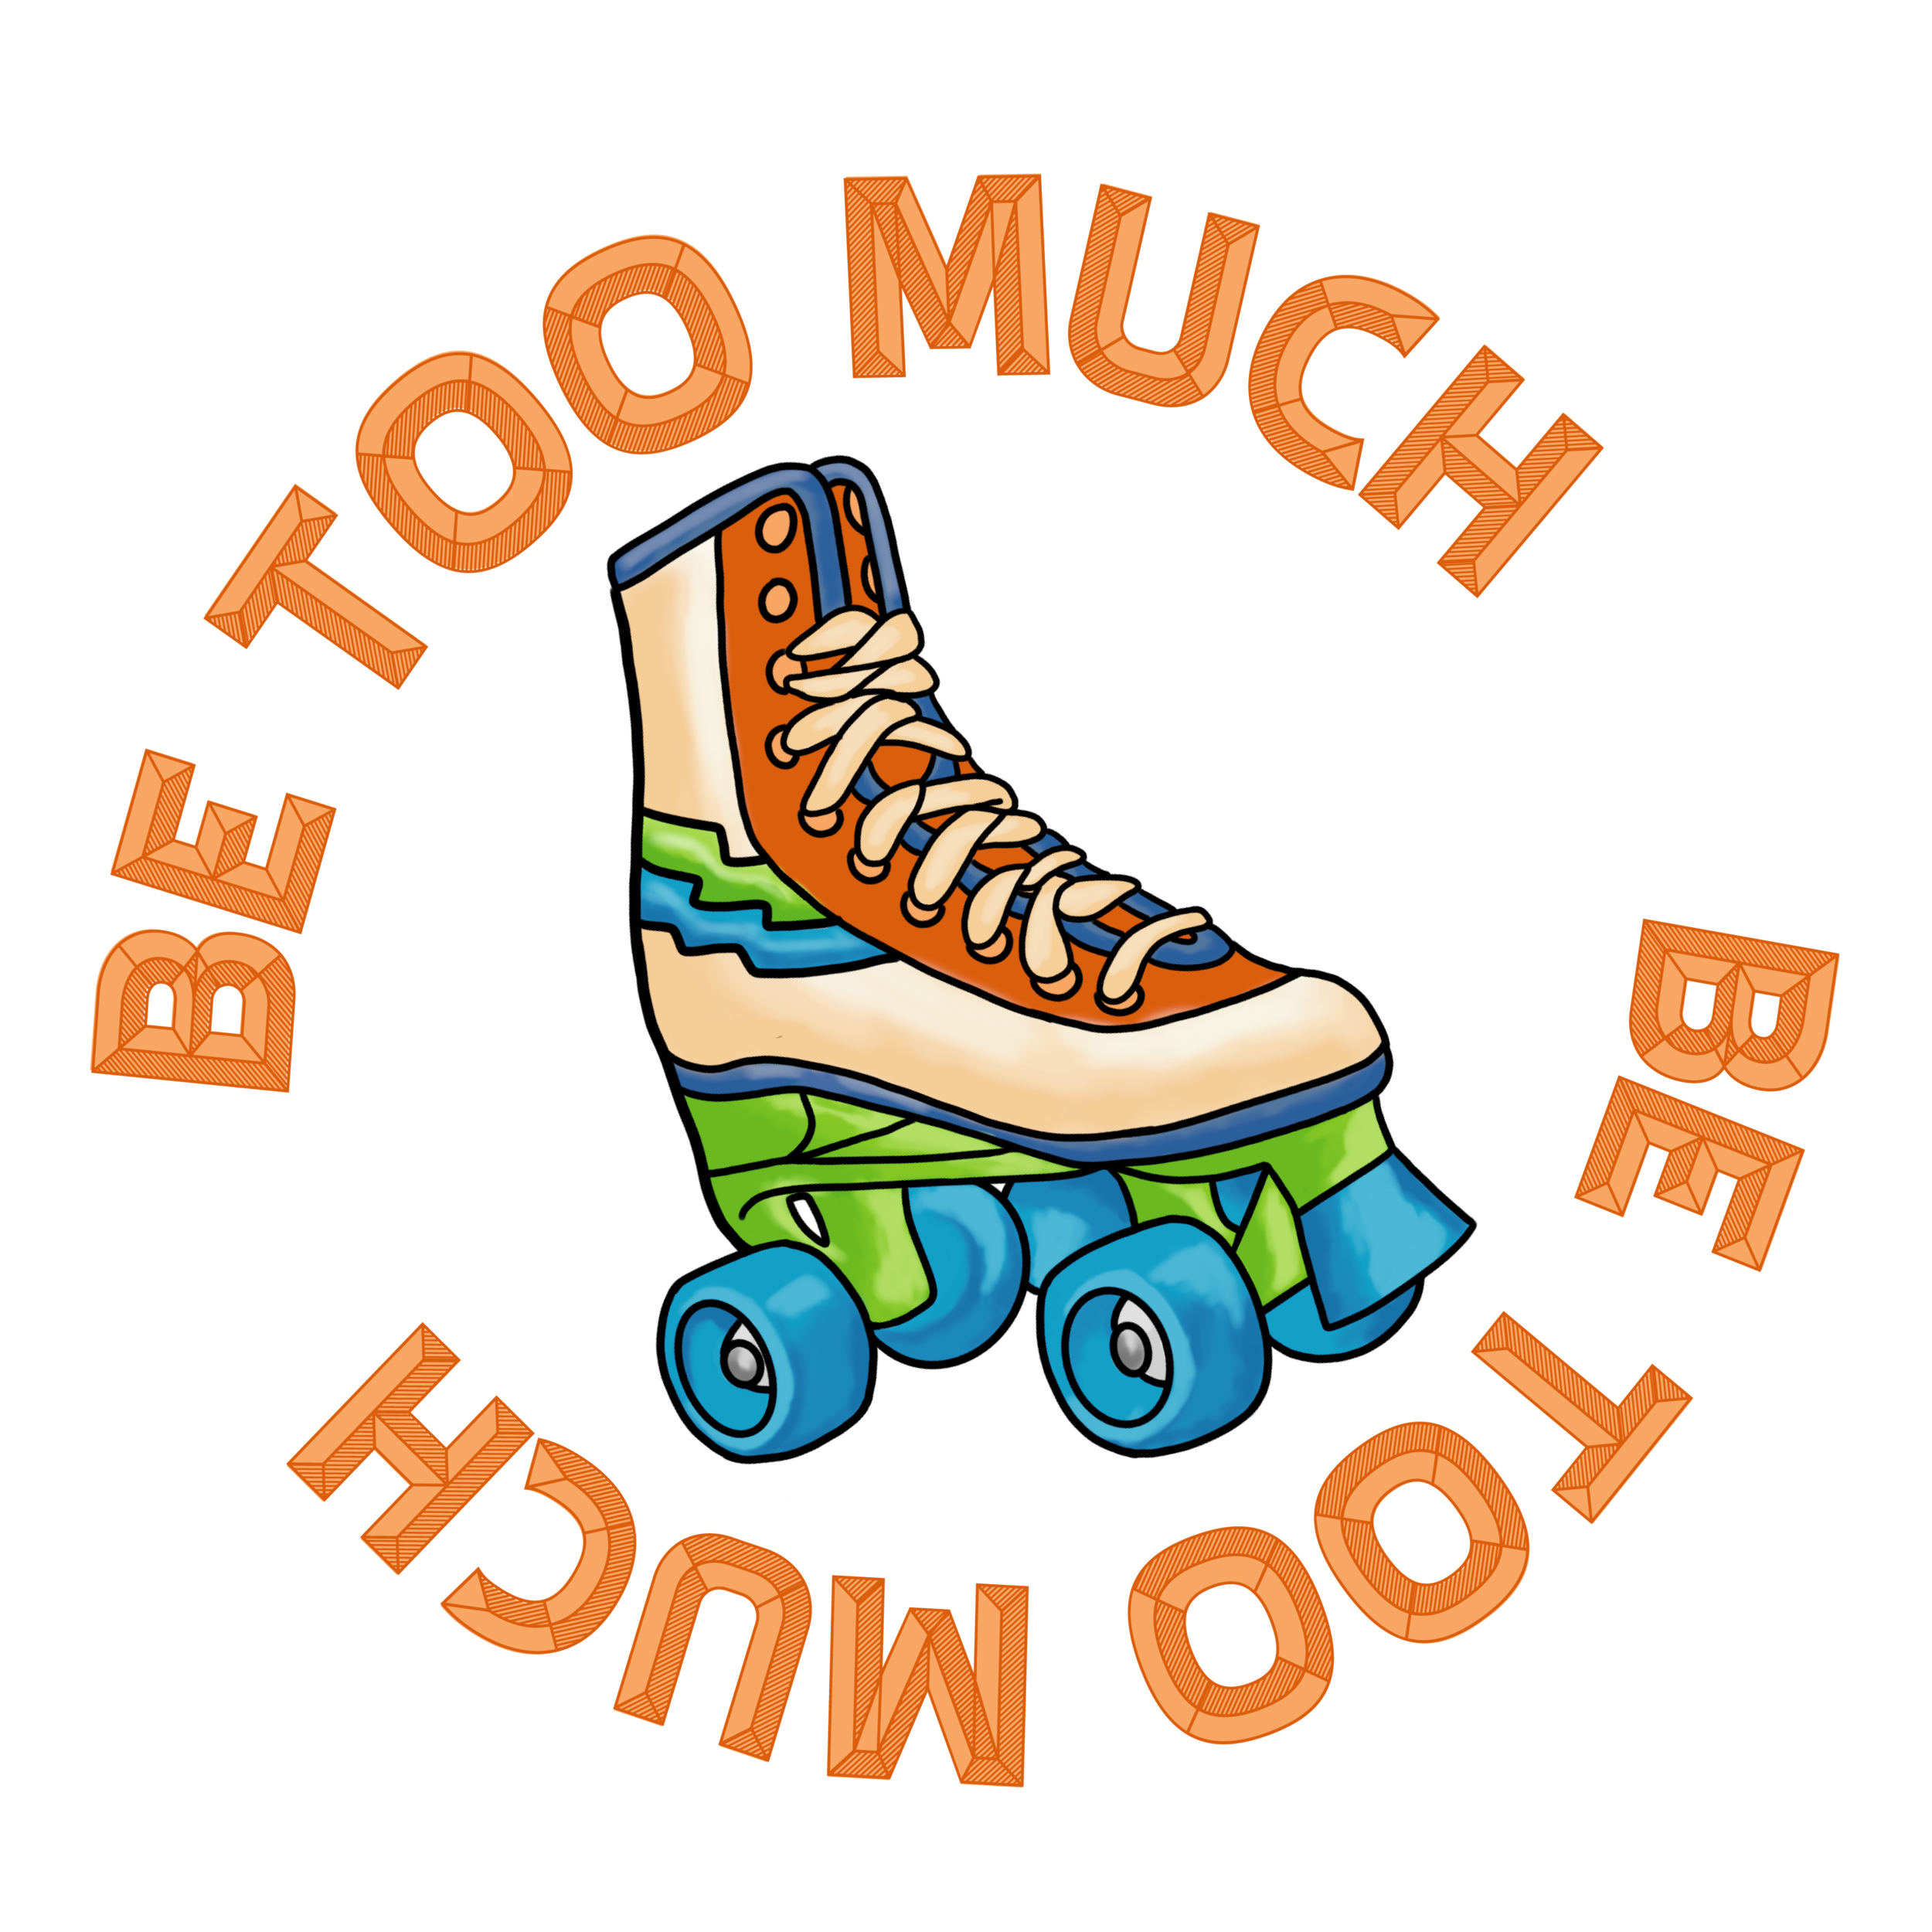 be too much orange font high res-01.png